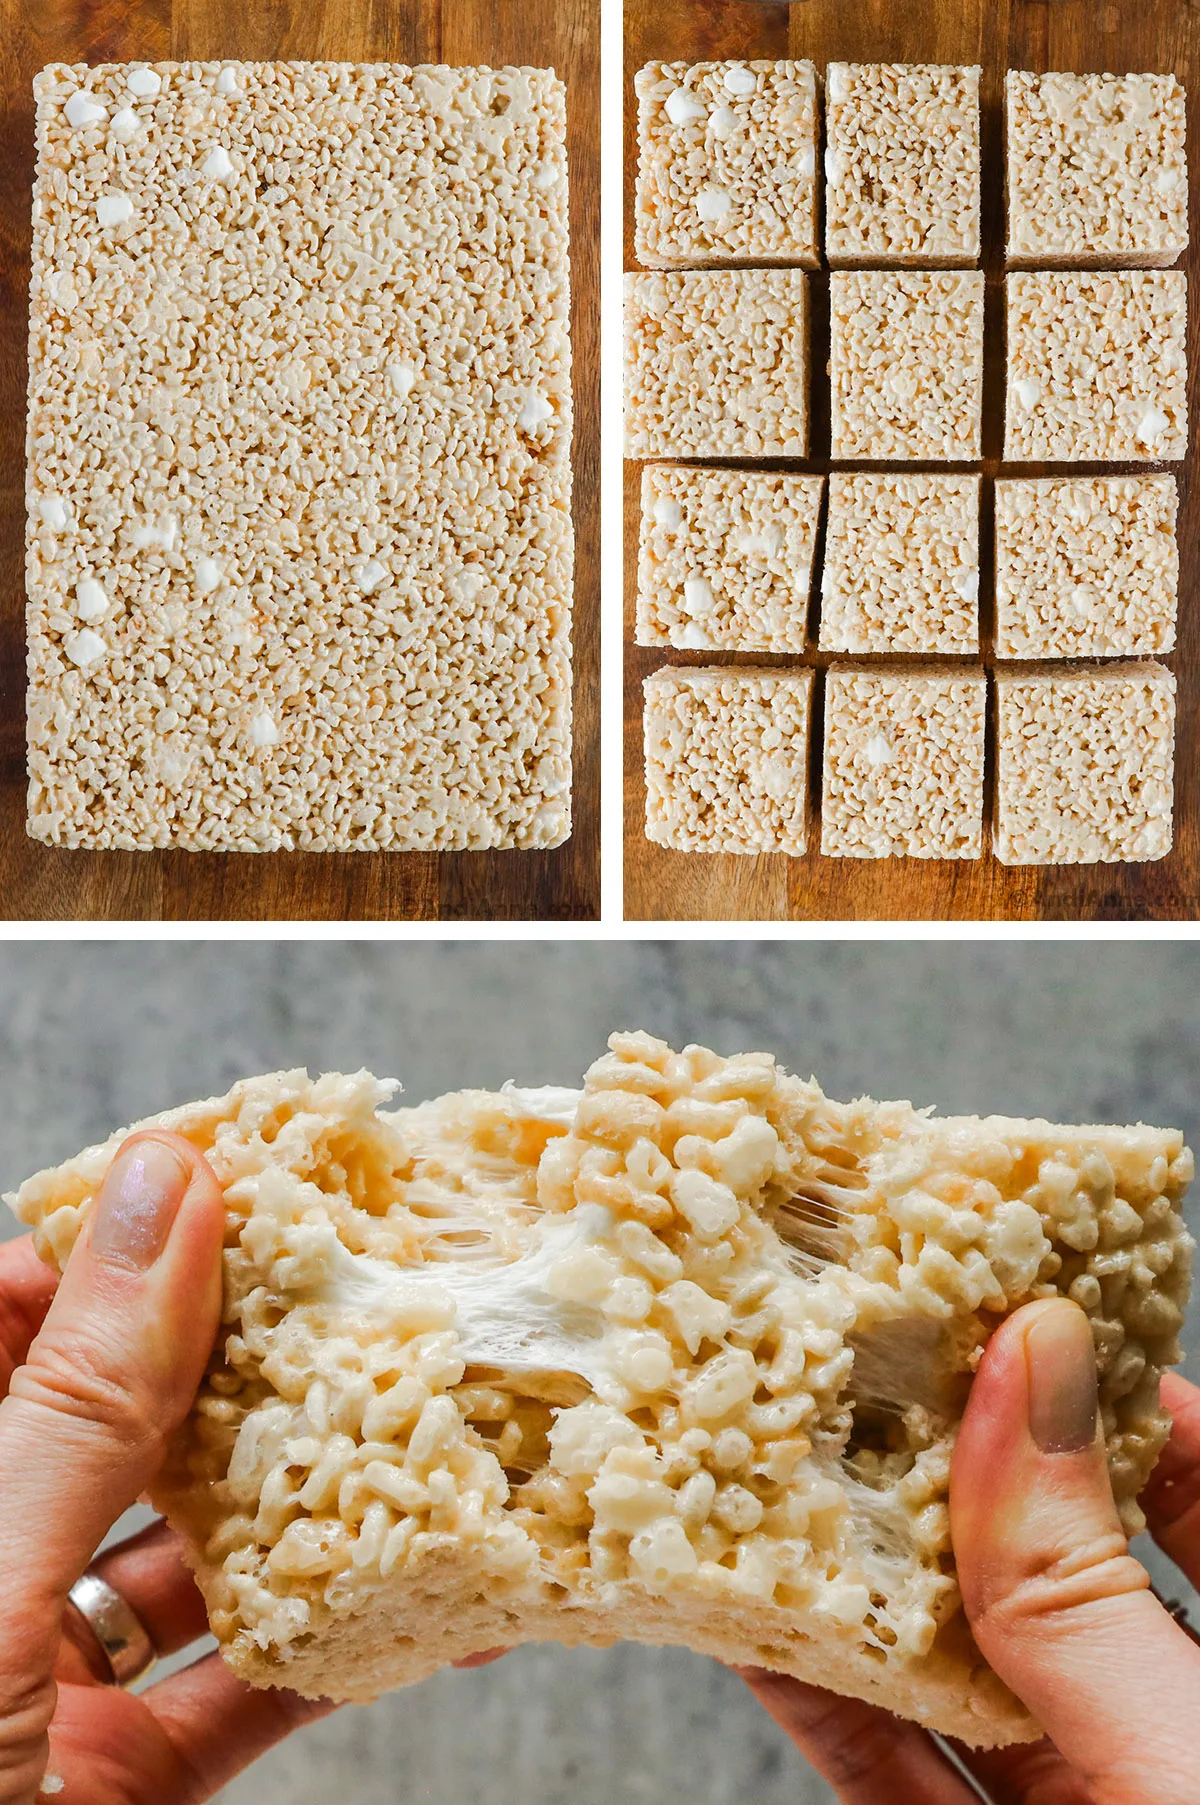 Three images: first is a block of rice krispies treats uncut and on cutting block, second is rice krispies cut into 12 squares, third is a hand pulling a rice krispies treat apart and you can see the marshmallow stretching in between.